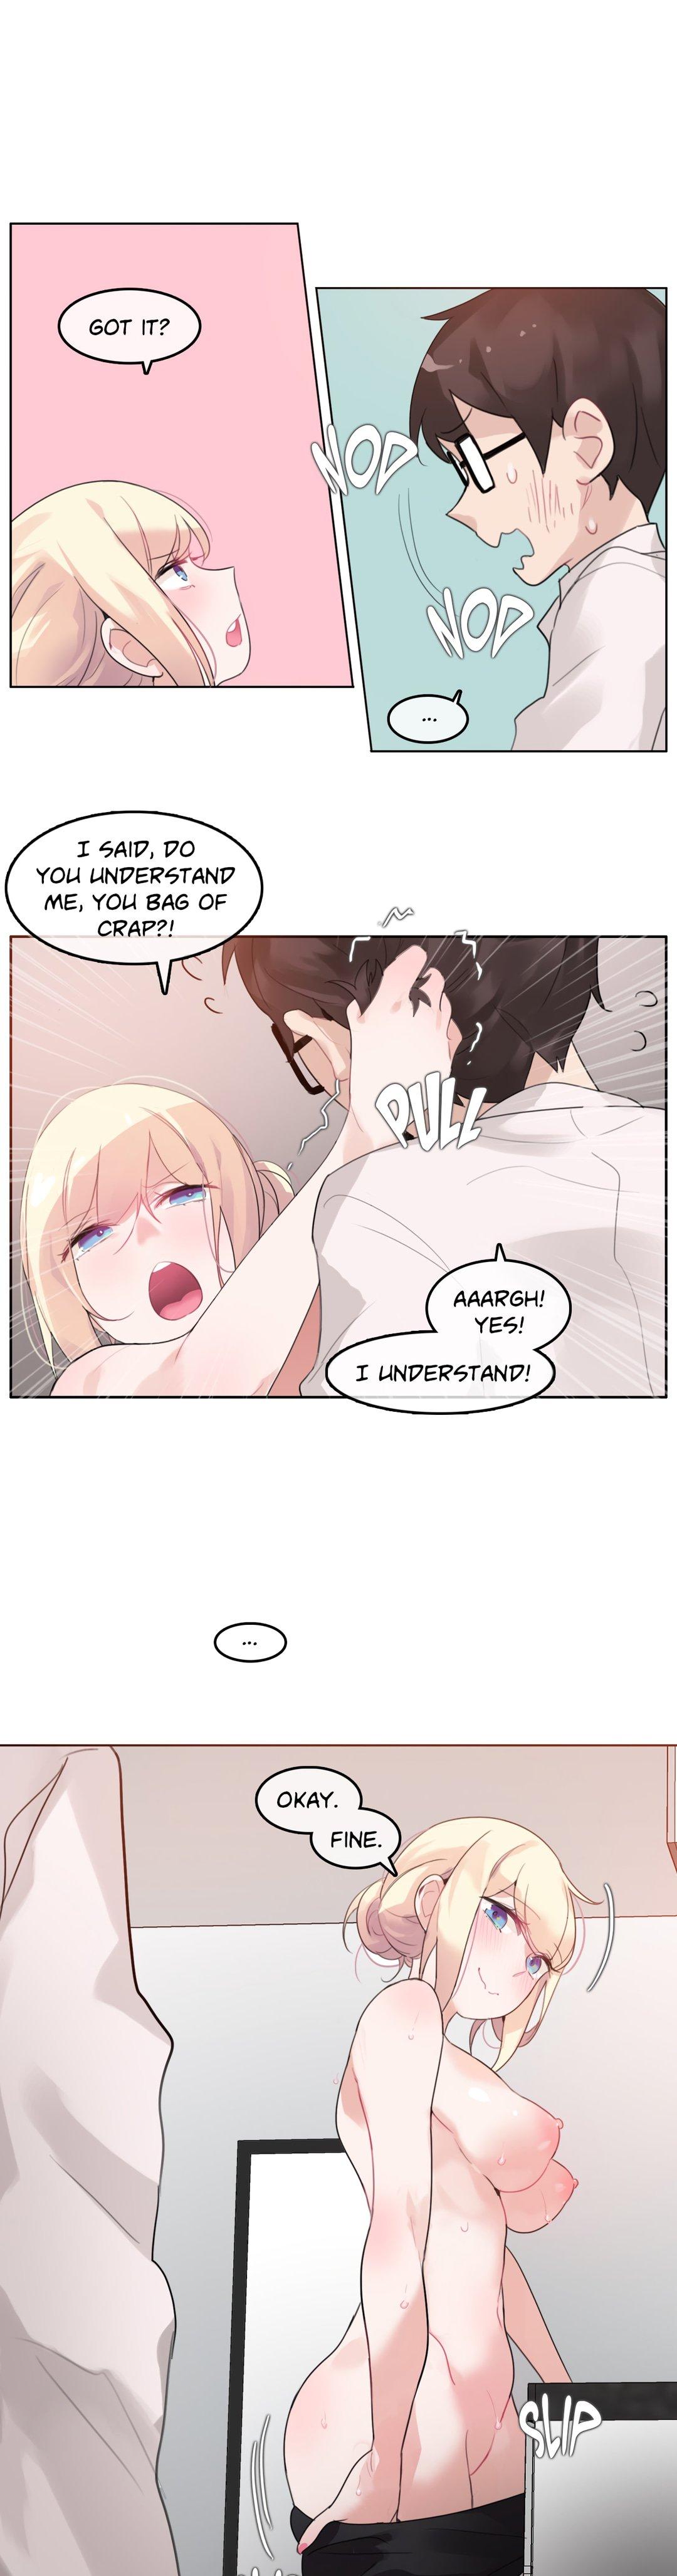 A Pervert's Daily Life Ch. 1-34 739